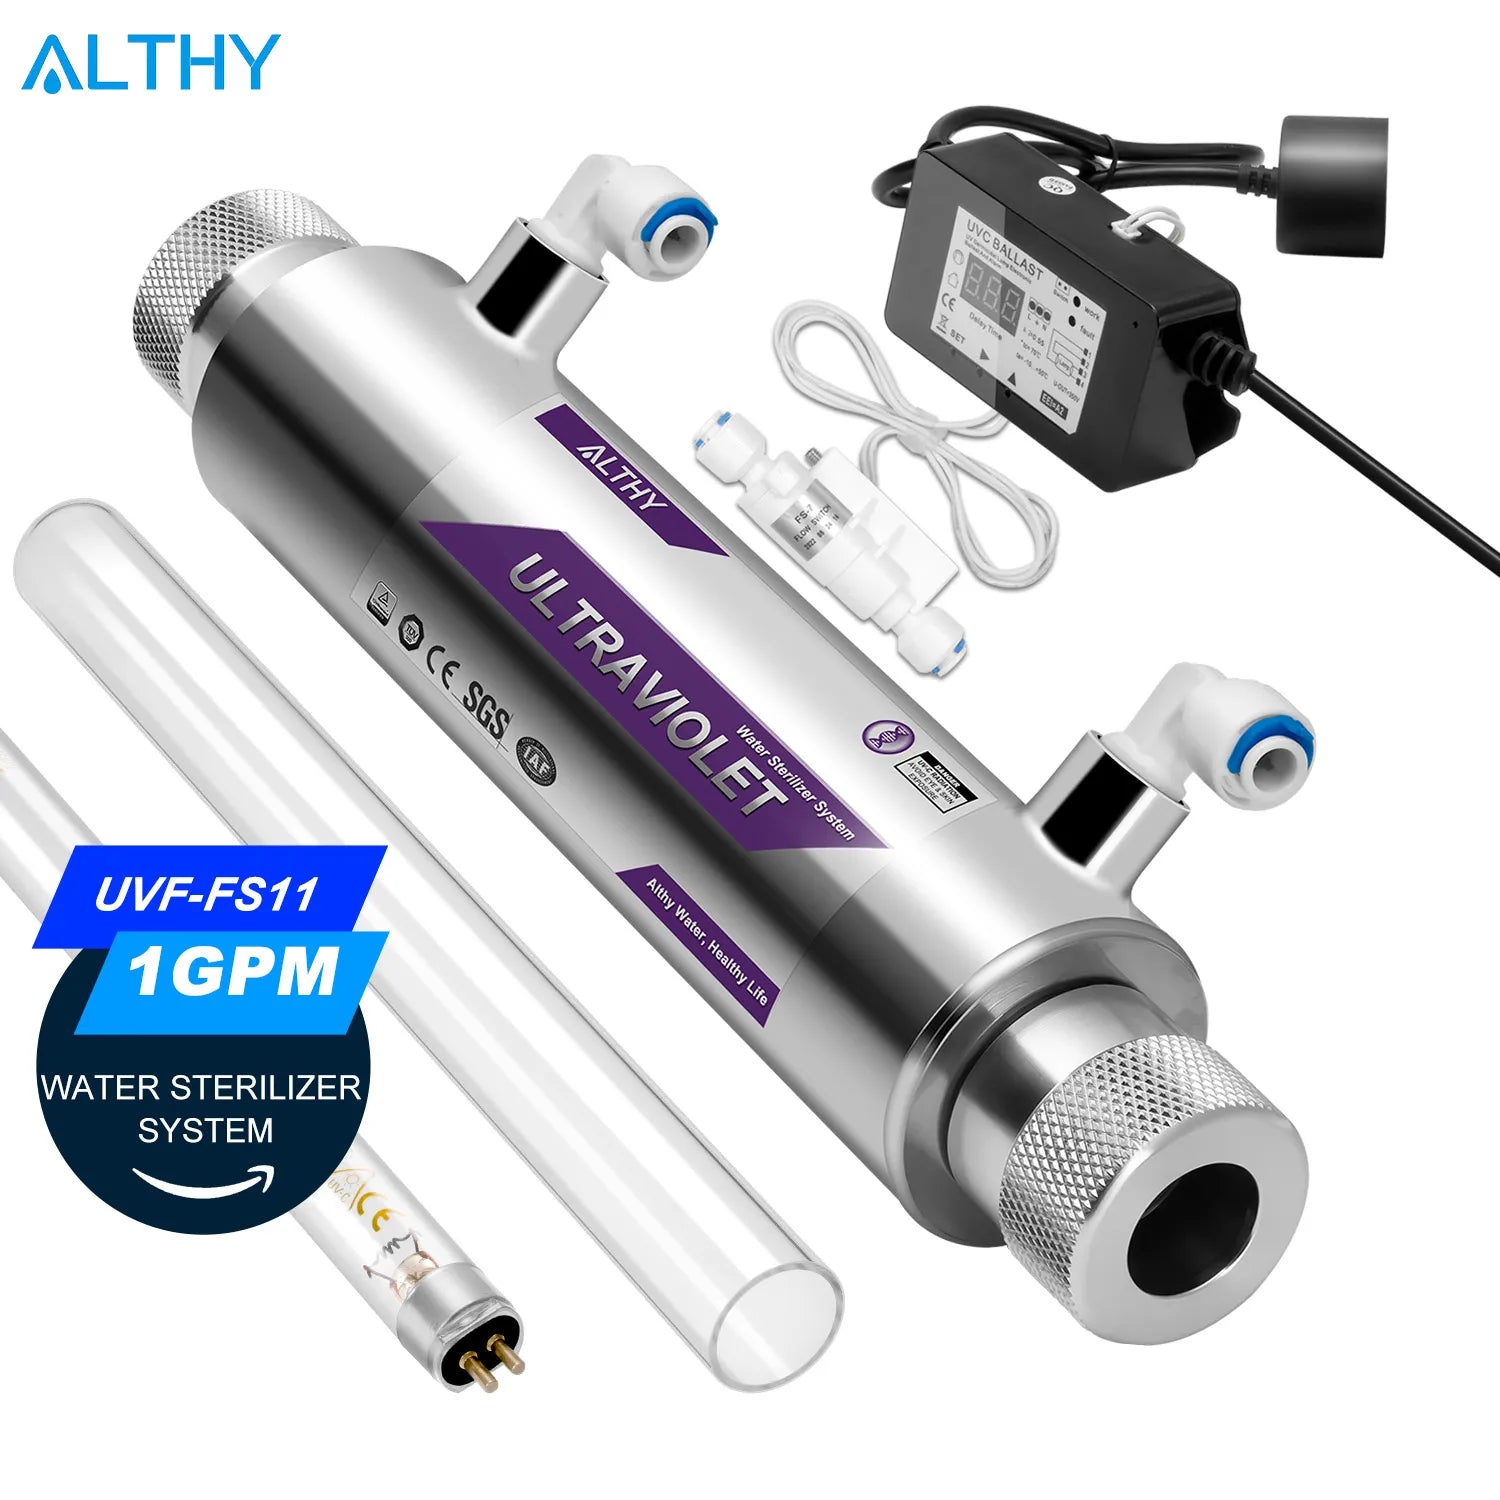 ALTHY UV Ultraviolet Water Sterilizer Purifier System Disinfection Filter Lamp + Flow Switch Control Stainless Steel 1GPM